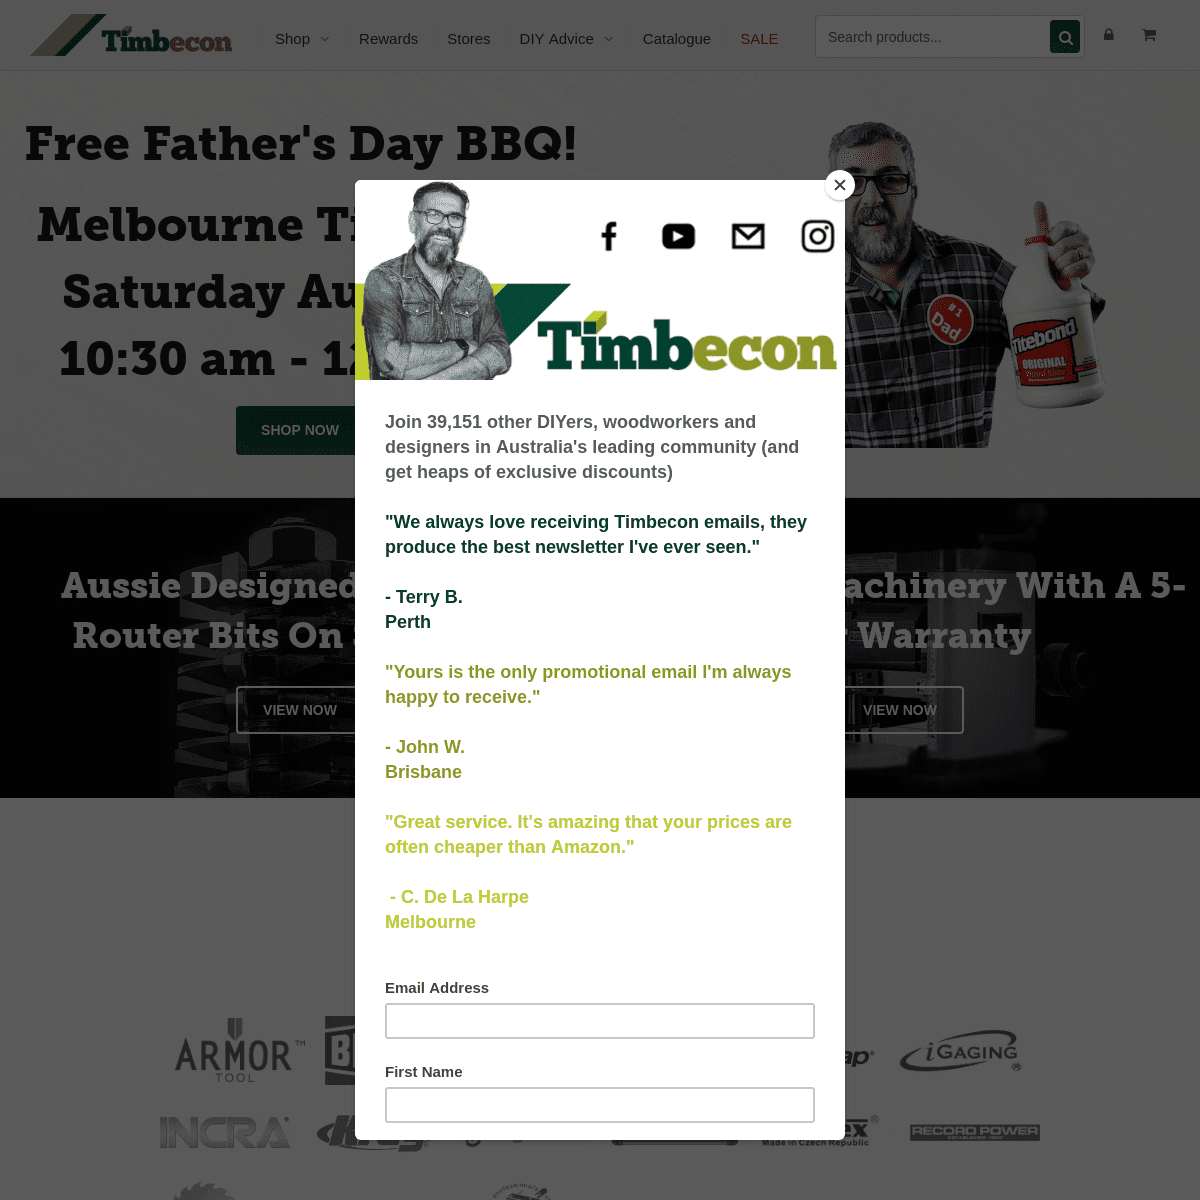 A complete backup of timbecon.com.au